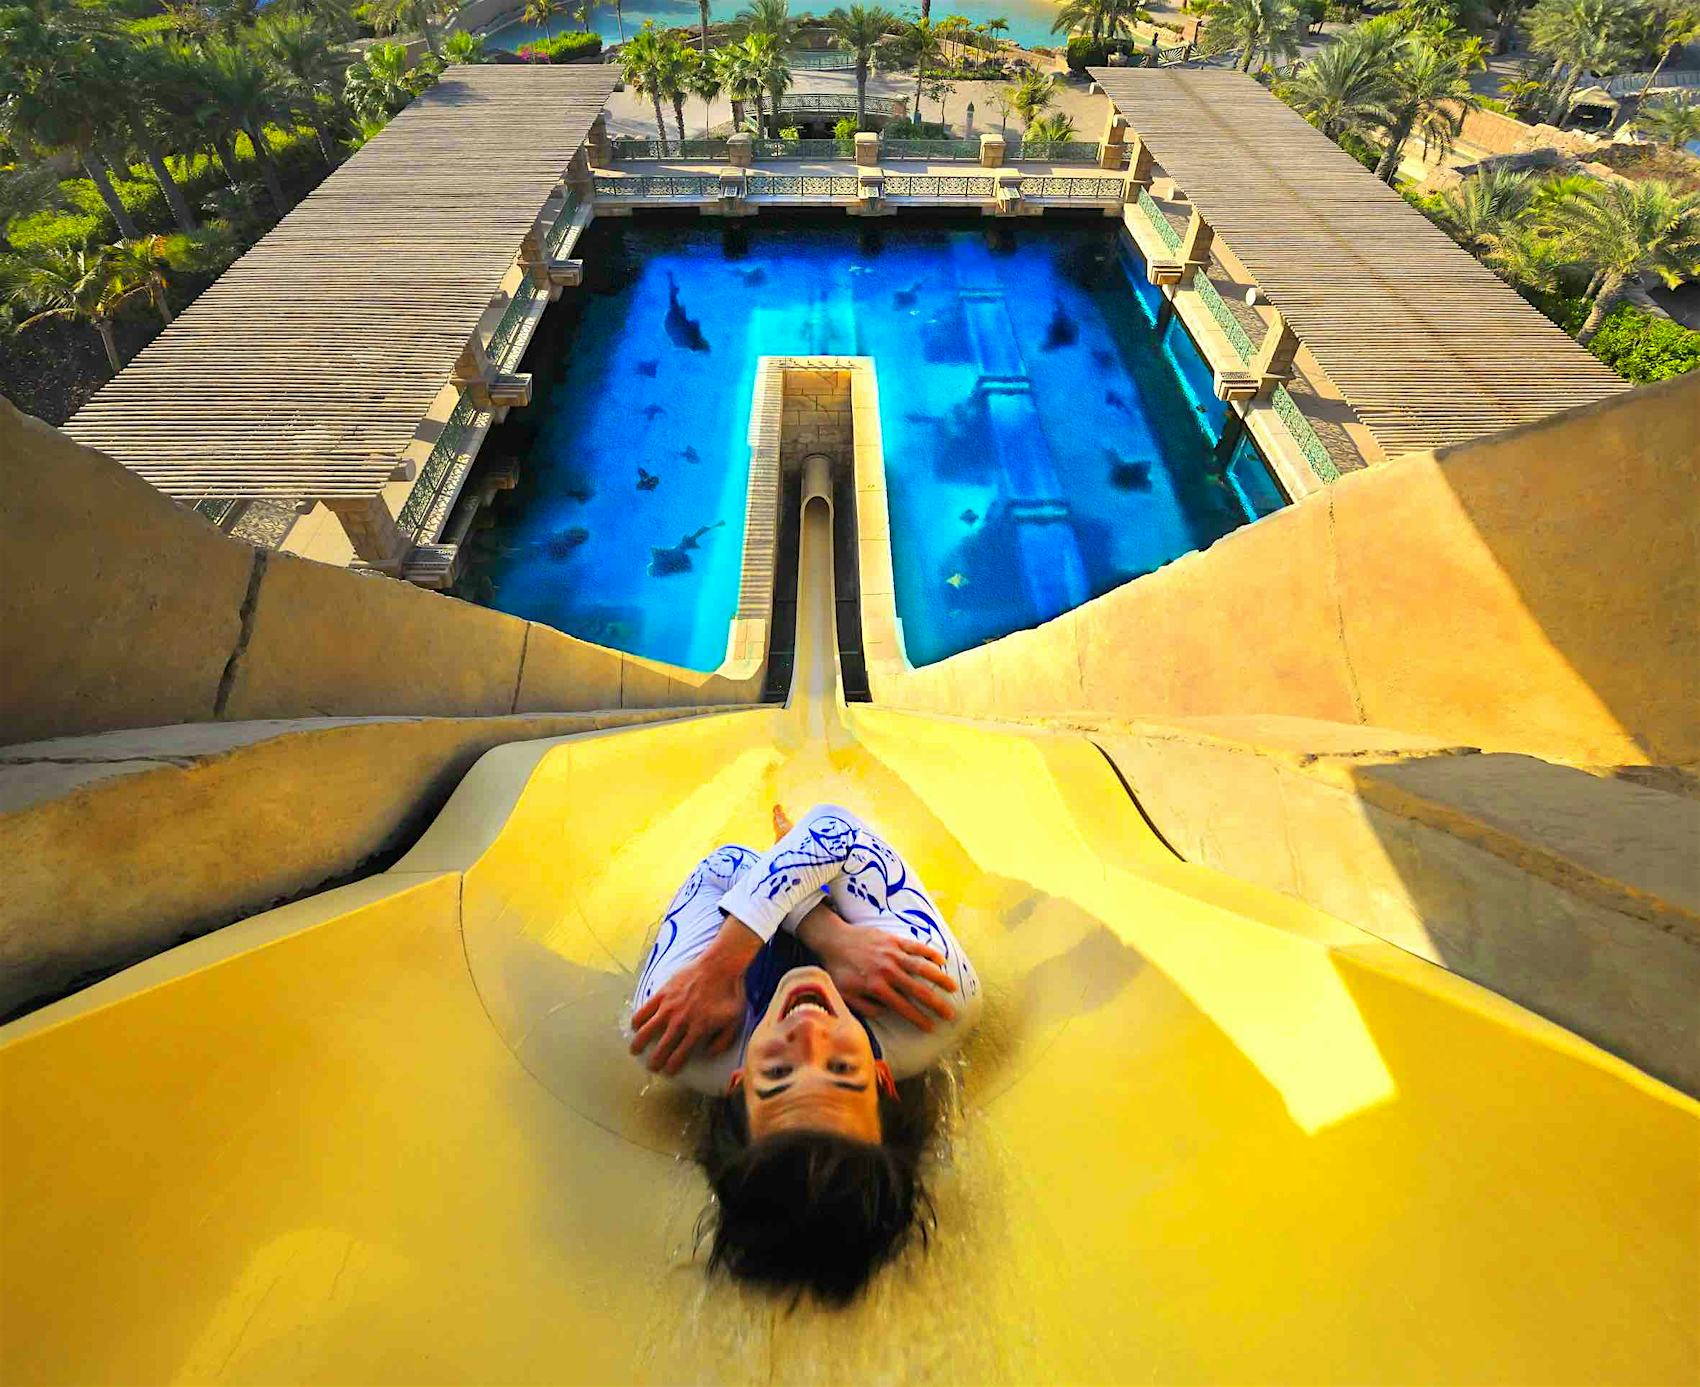 Dubai Water Park Makes A Splash As Largest In The World